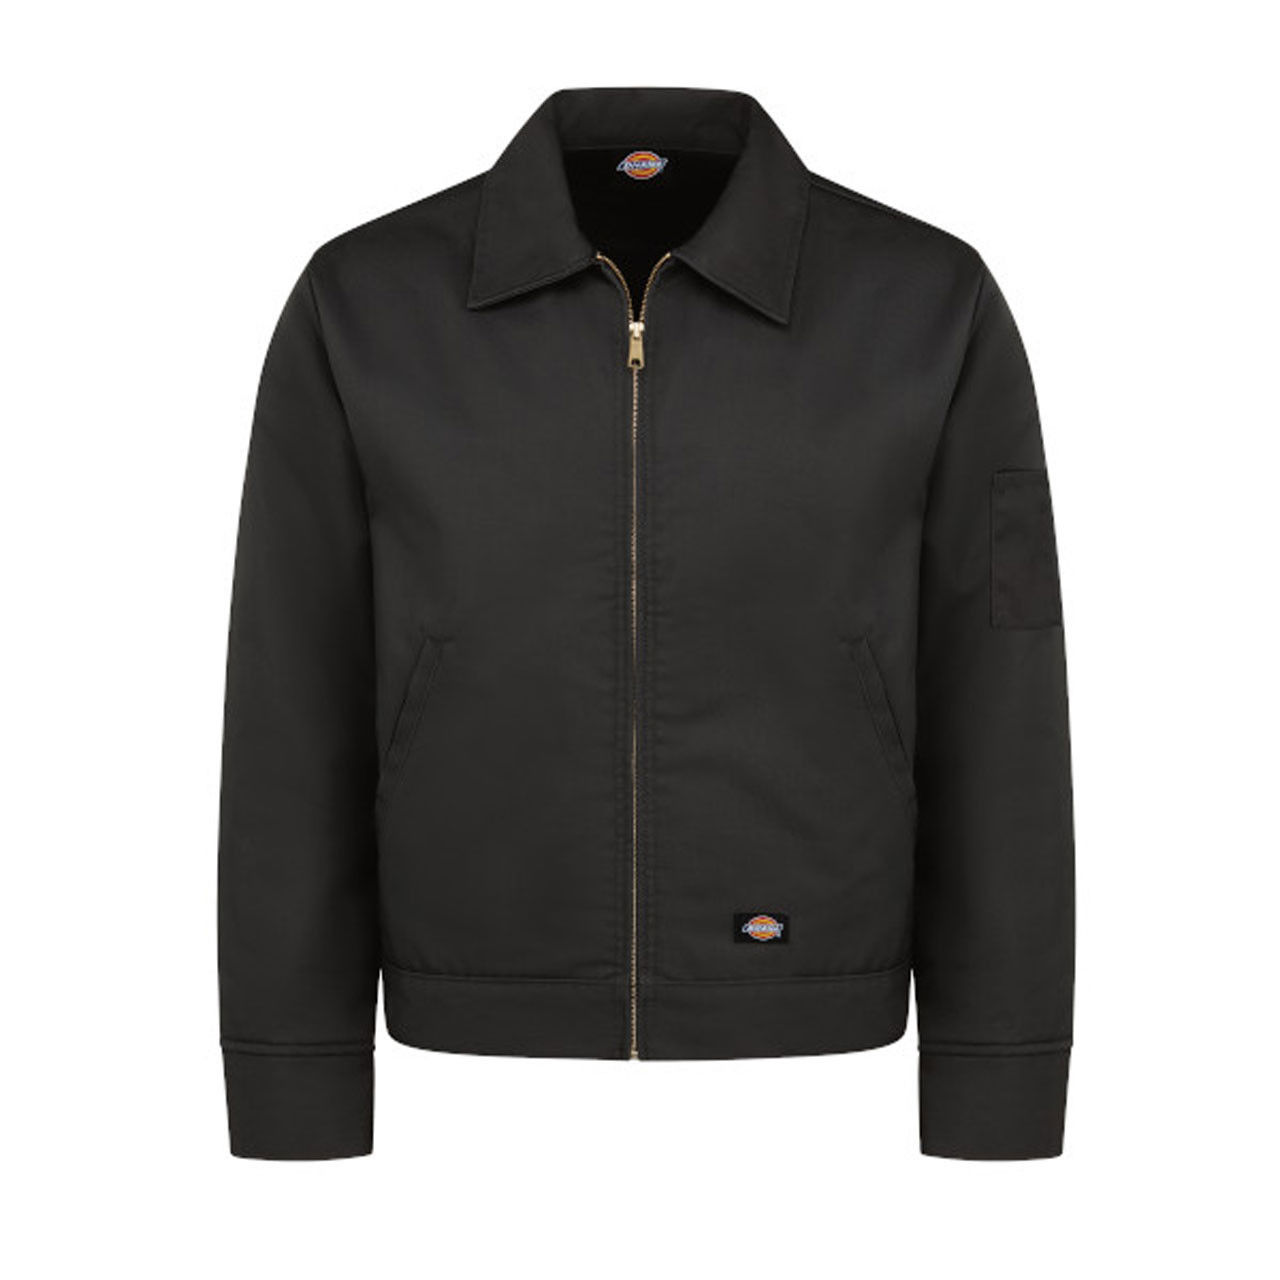 What is the origin of shipping for the black Dickies jacket?